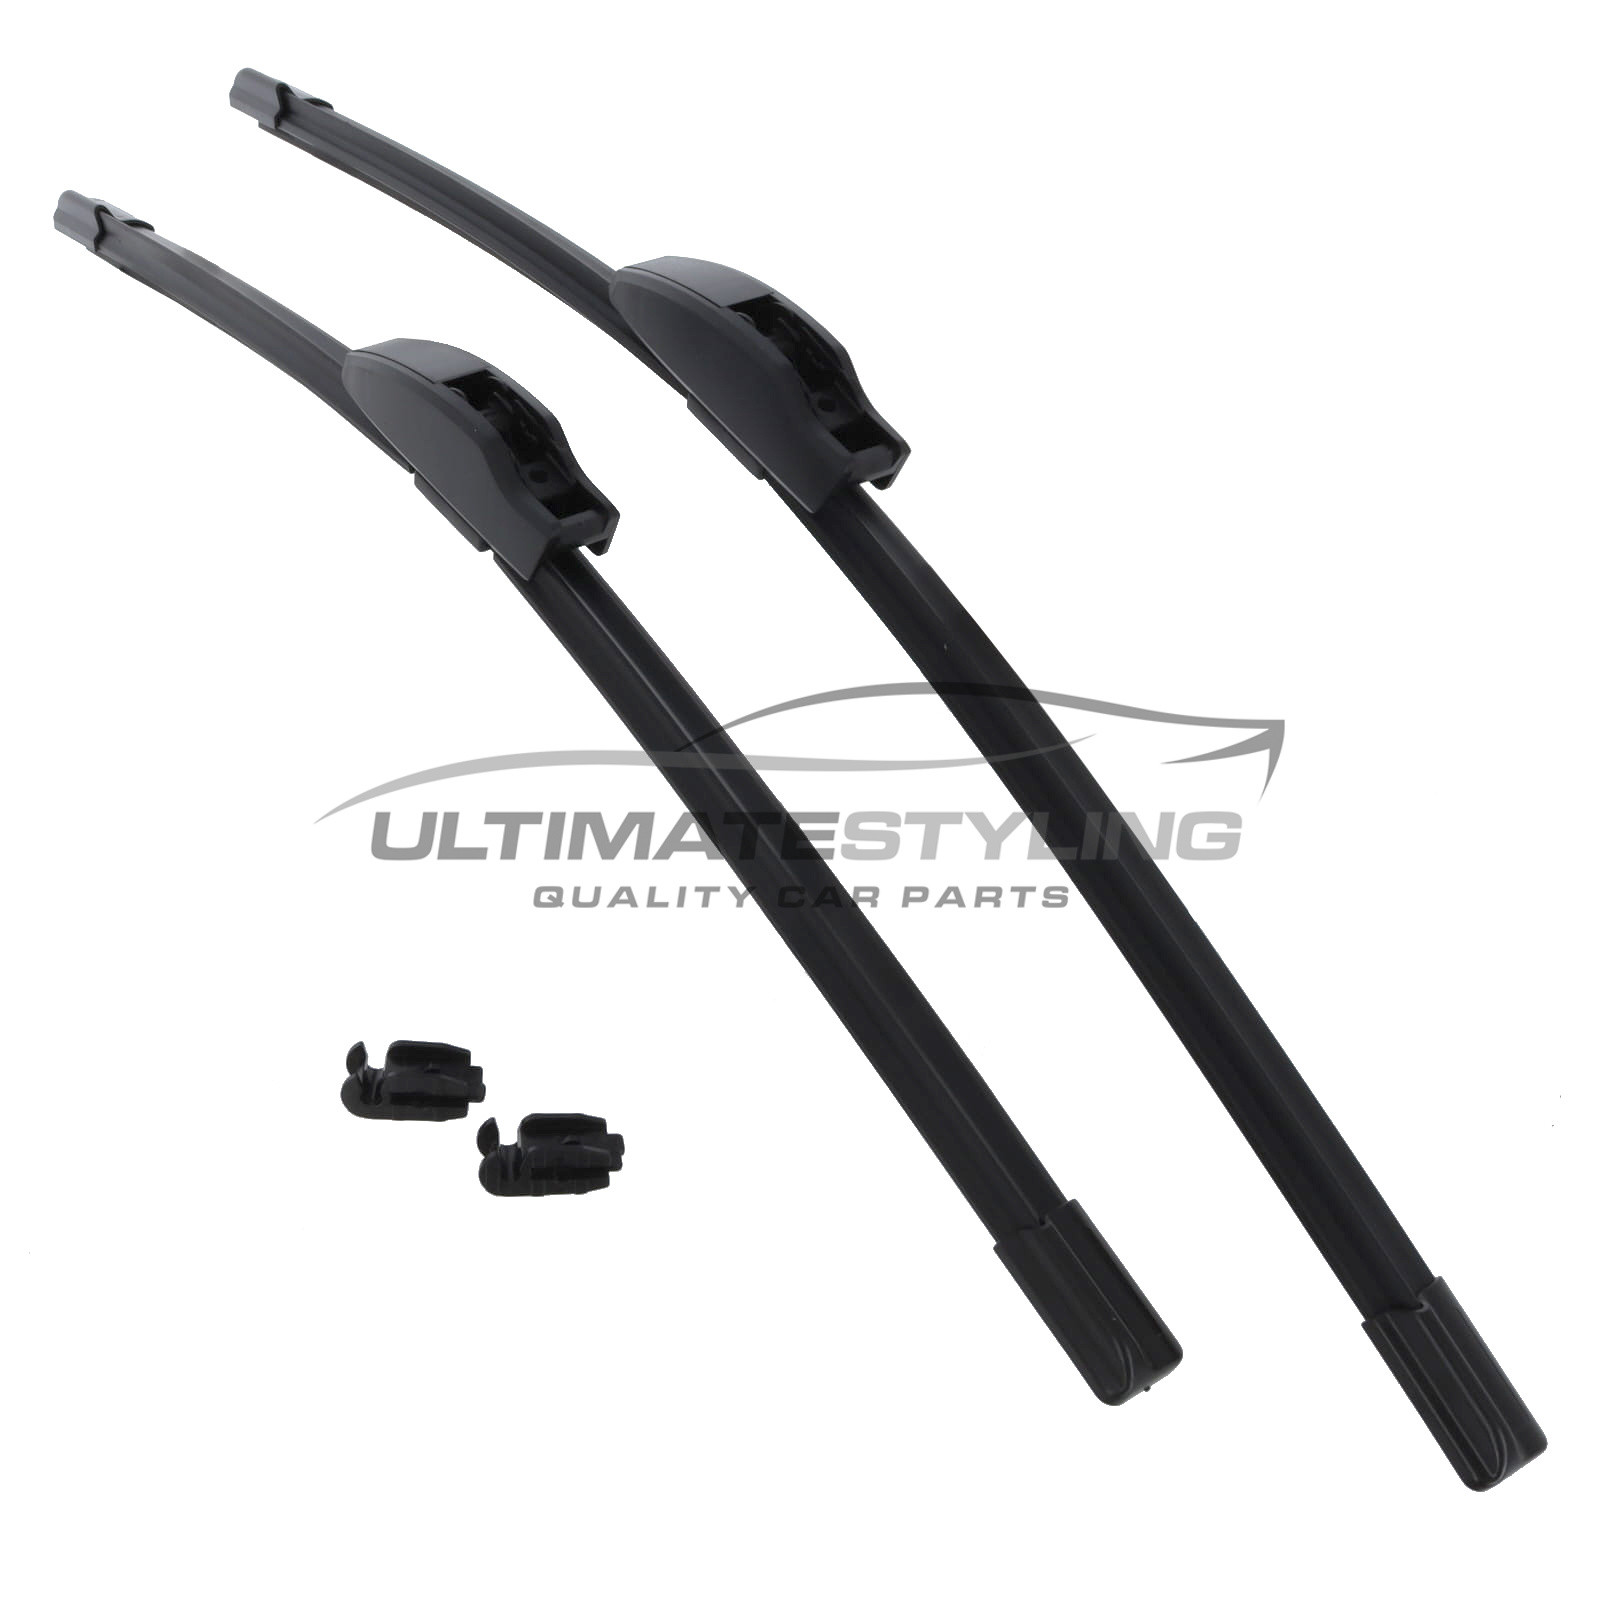 Drivers Side & Passenger Side (Front) Wiper Blades for Toyota Corolla